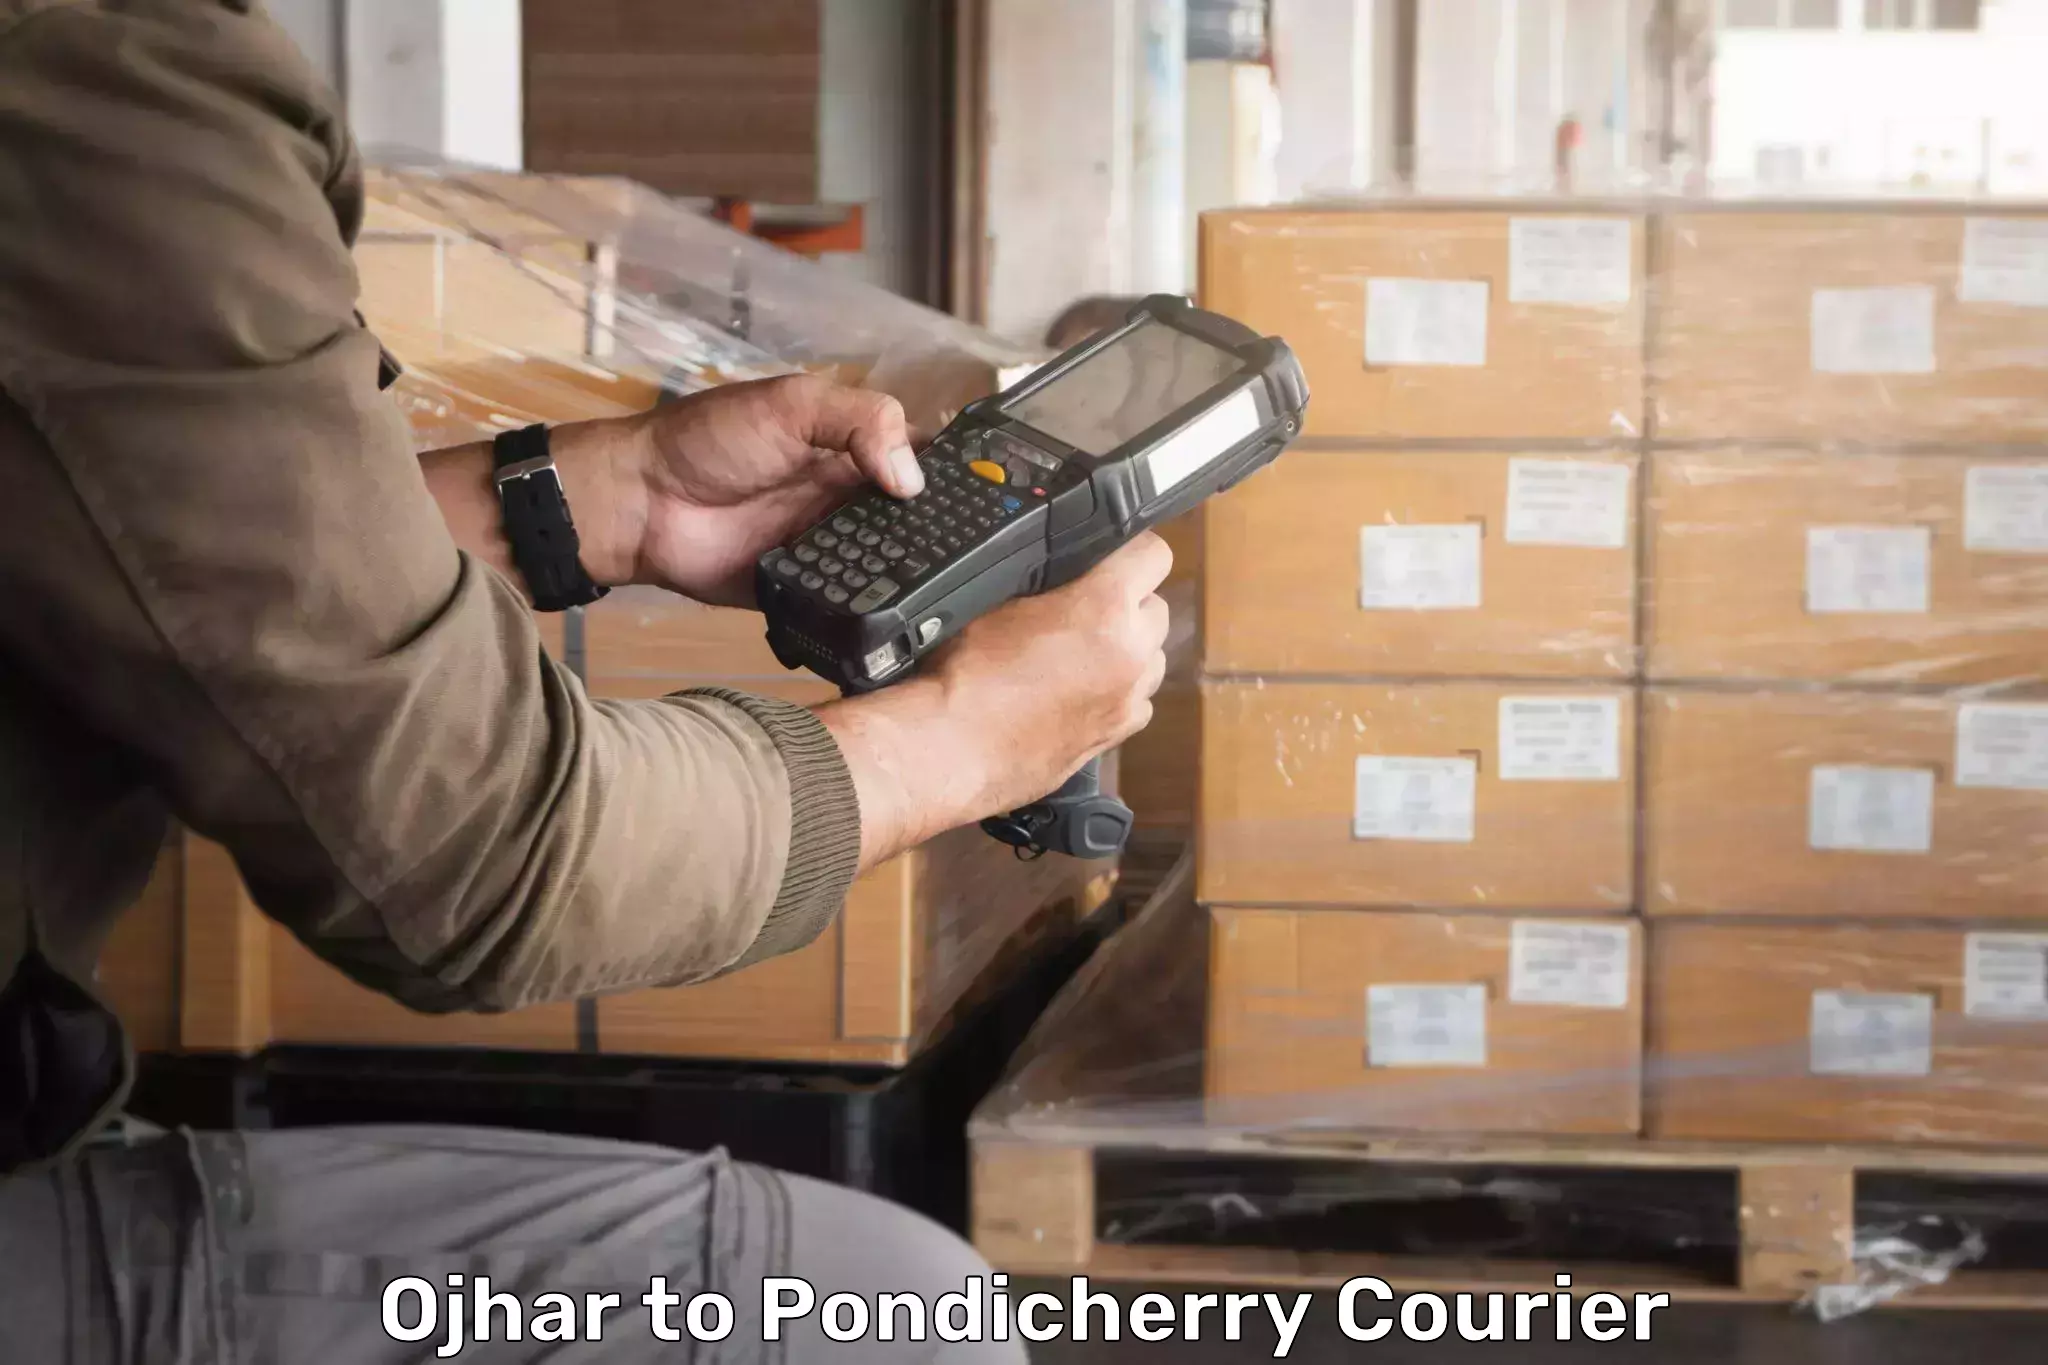 Sustainable courier practices Ojhar to Pondicherry University